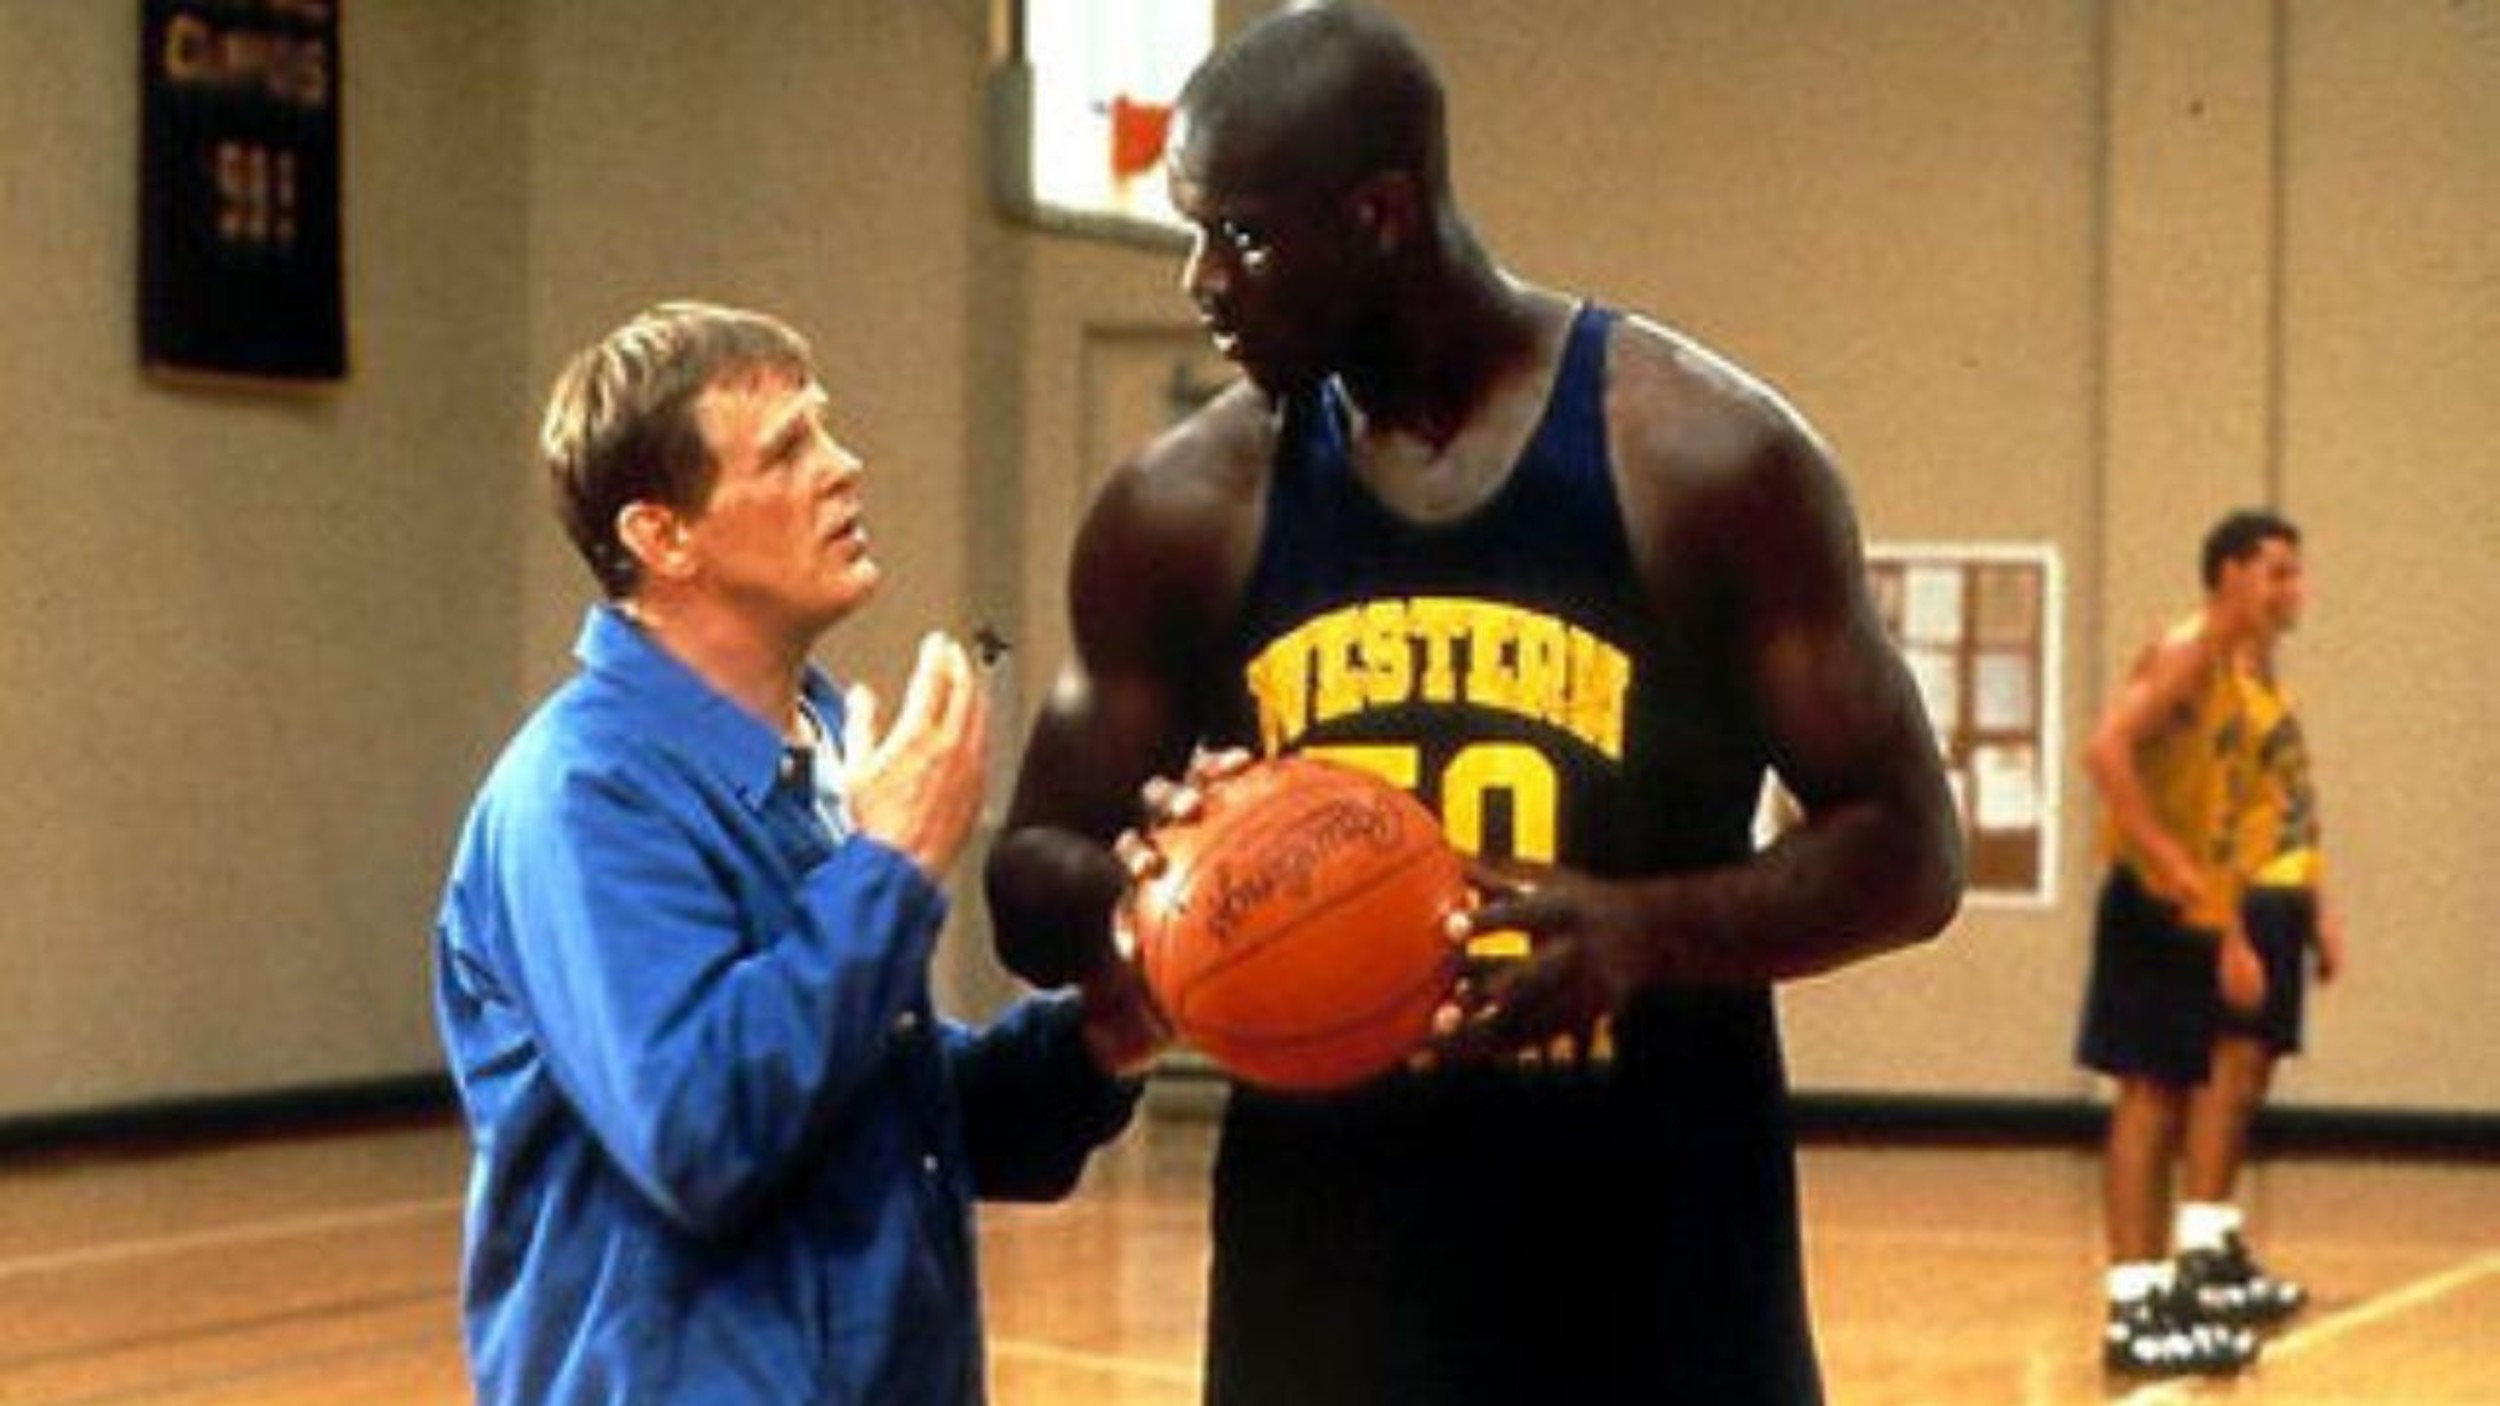 <p>Ron Shelton is back at it! The writer of “Bull Durham” also wrote “Blue Chips,” but William Friedkin handled the directing. It’s a fascinating movie, as a young Shaquille O’Neal and a young Penny Hardaway act in this film. So much did Shaq enjoy playing with Penny, he encouraged the Orlando Magic to bring Hardaway onto the team. They listened, and the rest is history.</p><p><a href='https://www.msn.com/en-us/community/channel/vid-cj9pqbr0vn9in2b6ddcd8sfgpfq6x6utp44fssrv6mc2gtybw0us'>Follow us on MSN to see more of our exclusive entertainment content.</a></p>